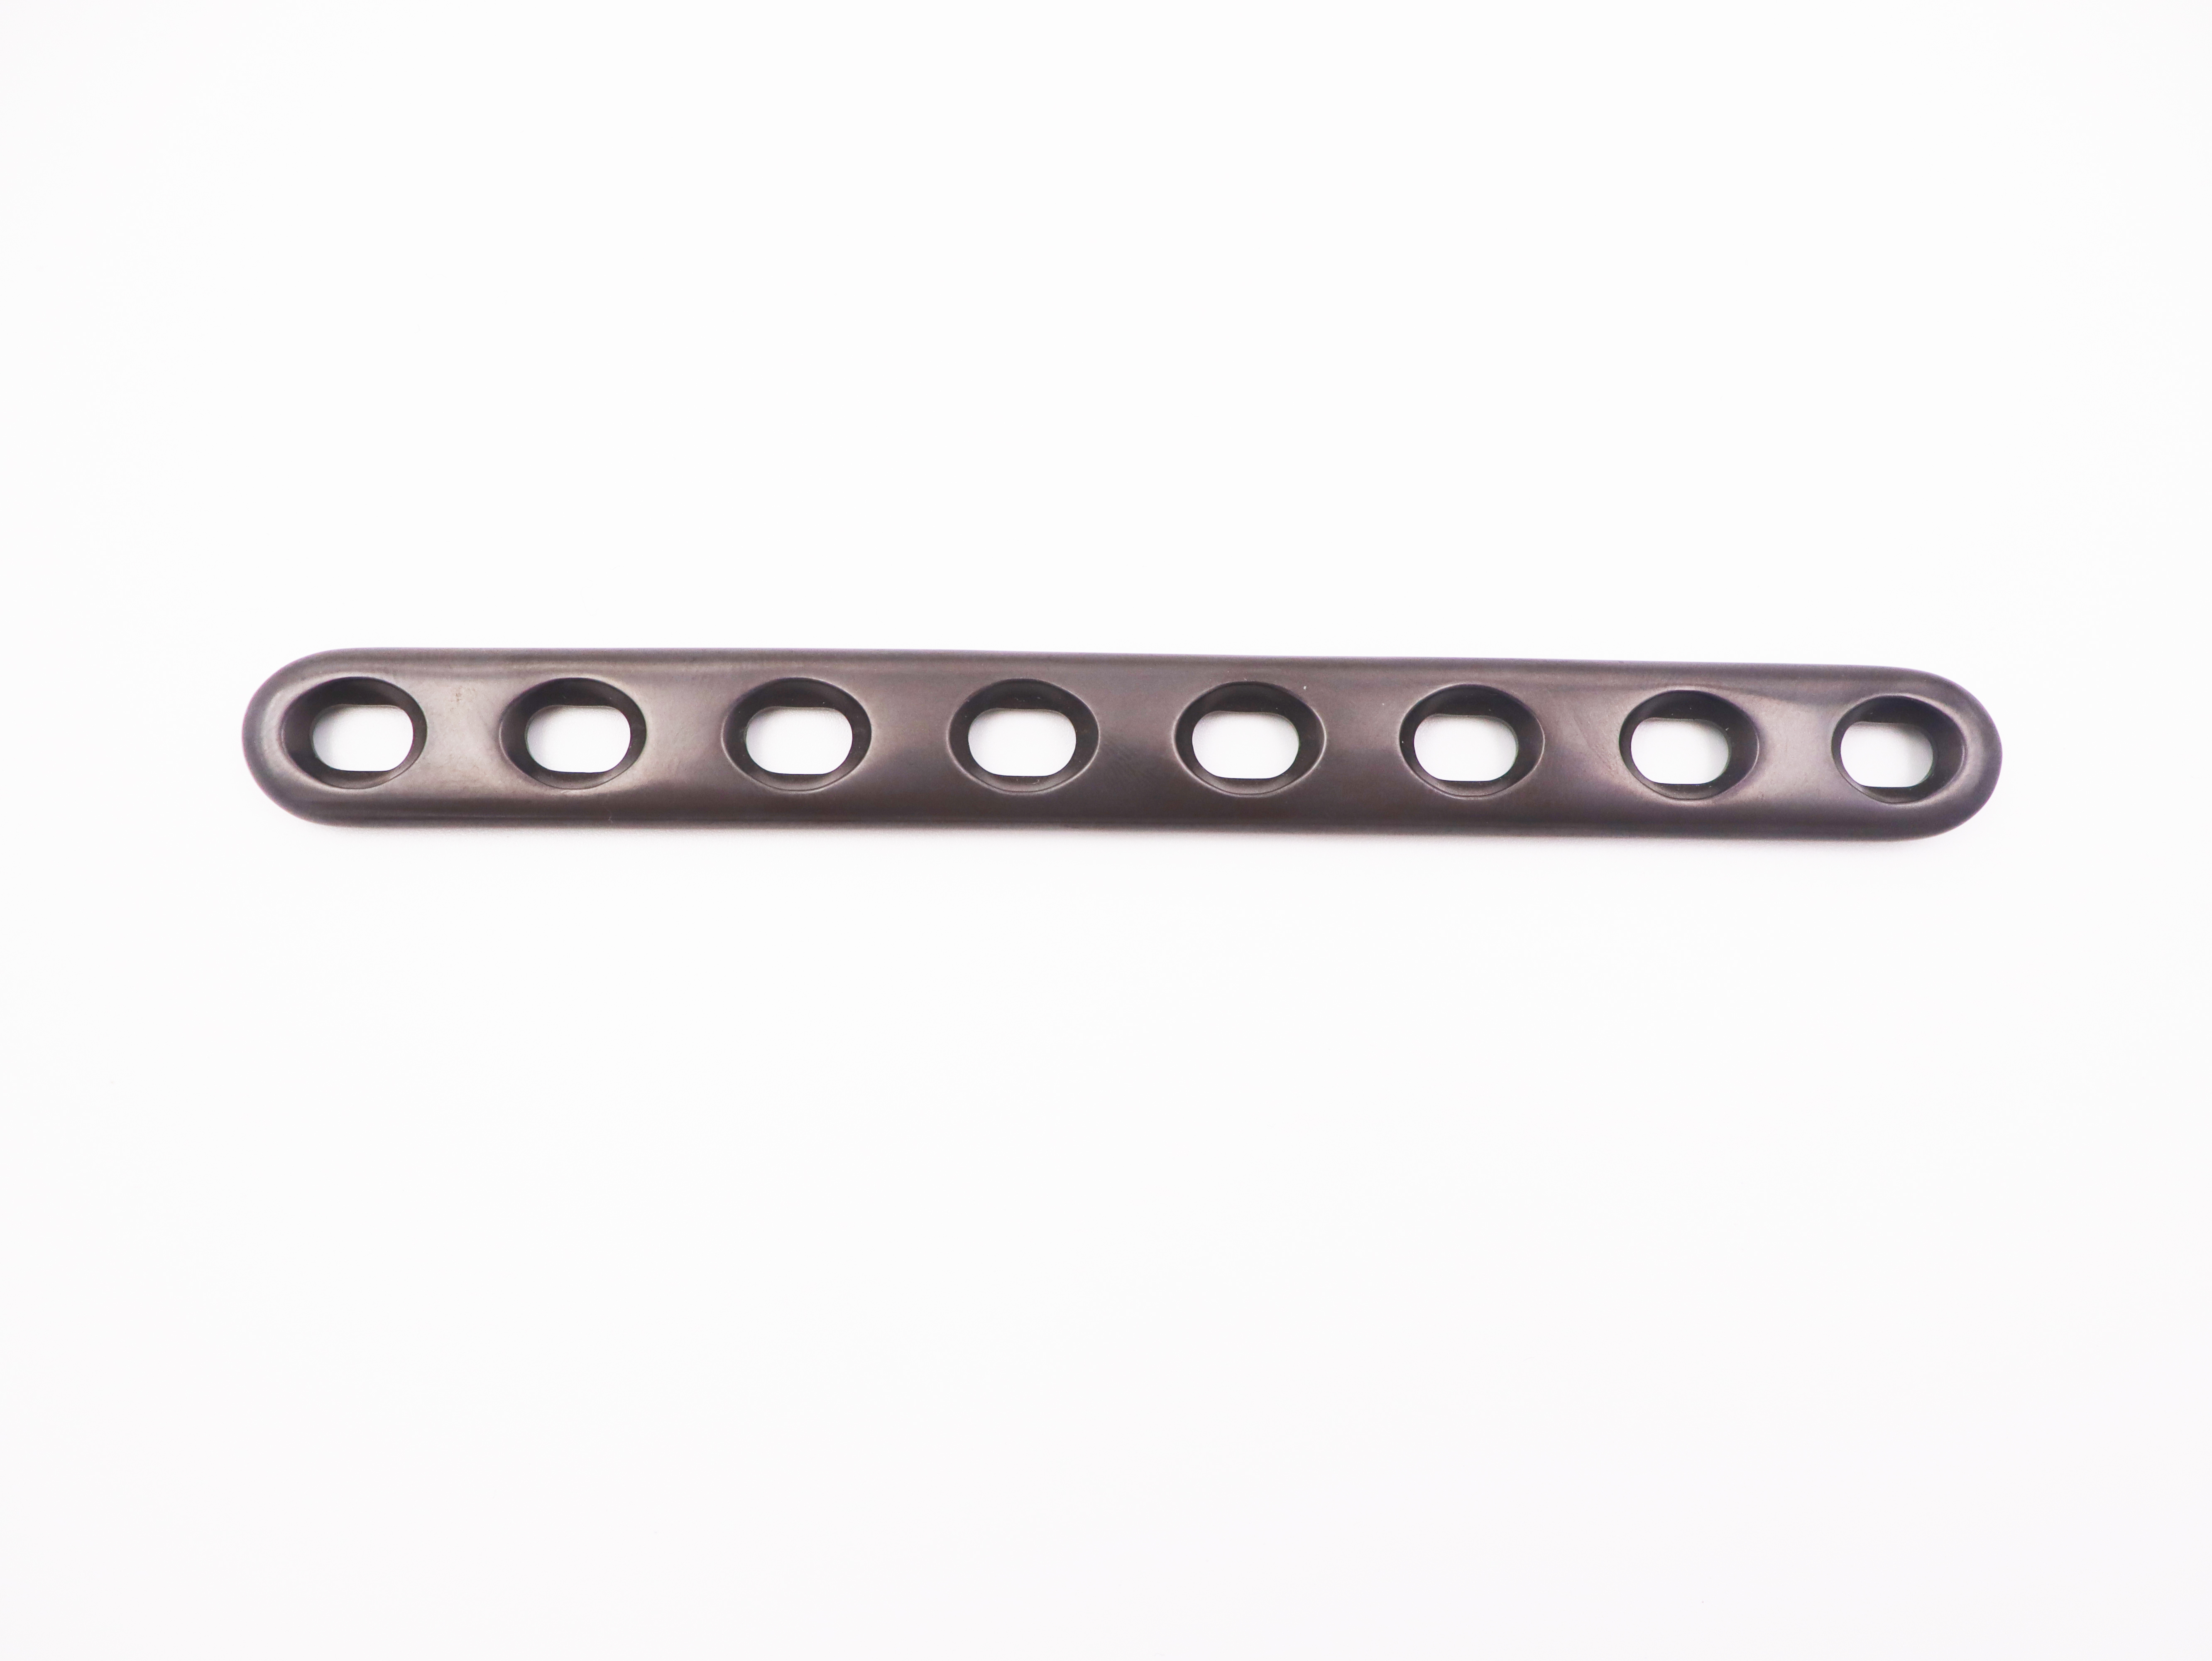 JINLU Medical Orthopedic implants LC-DCP Femoral femur diaphysis fracture plate